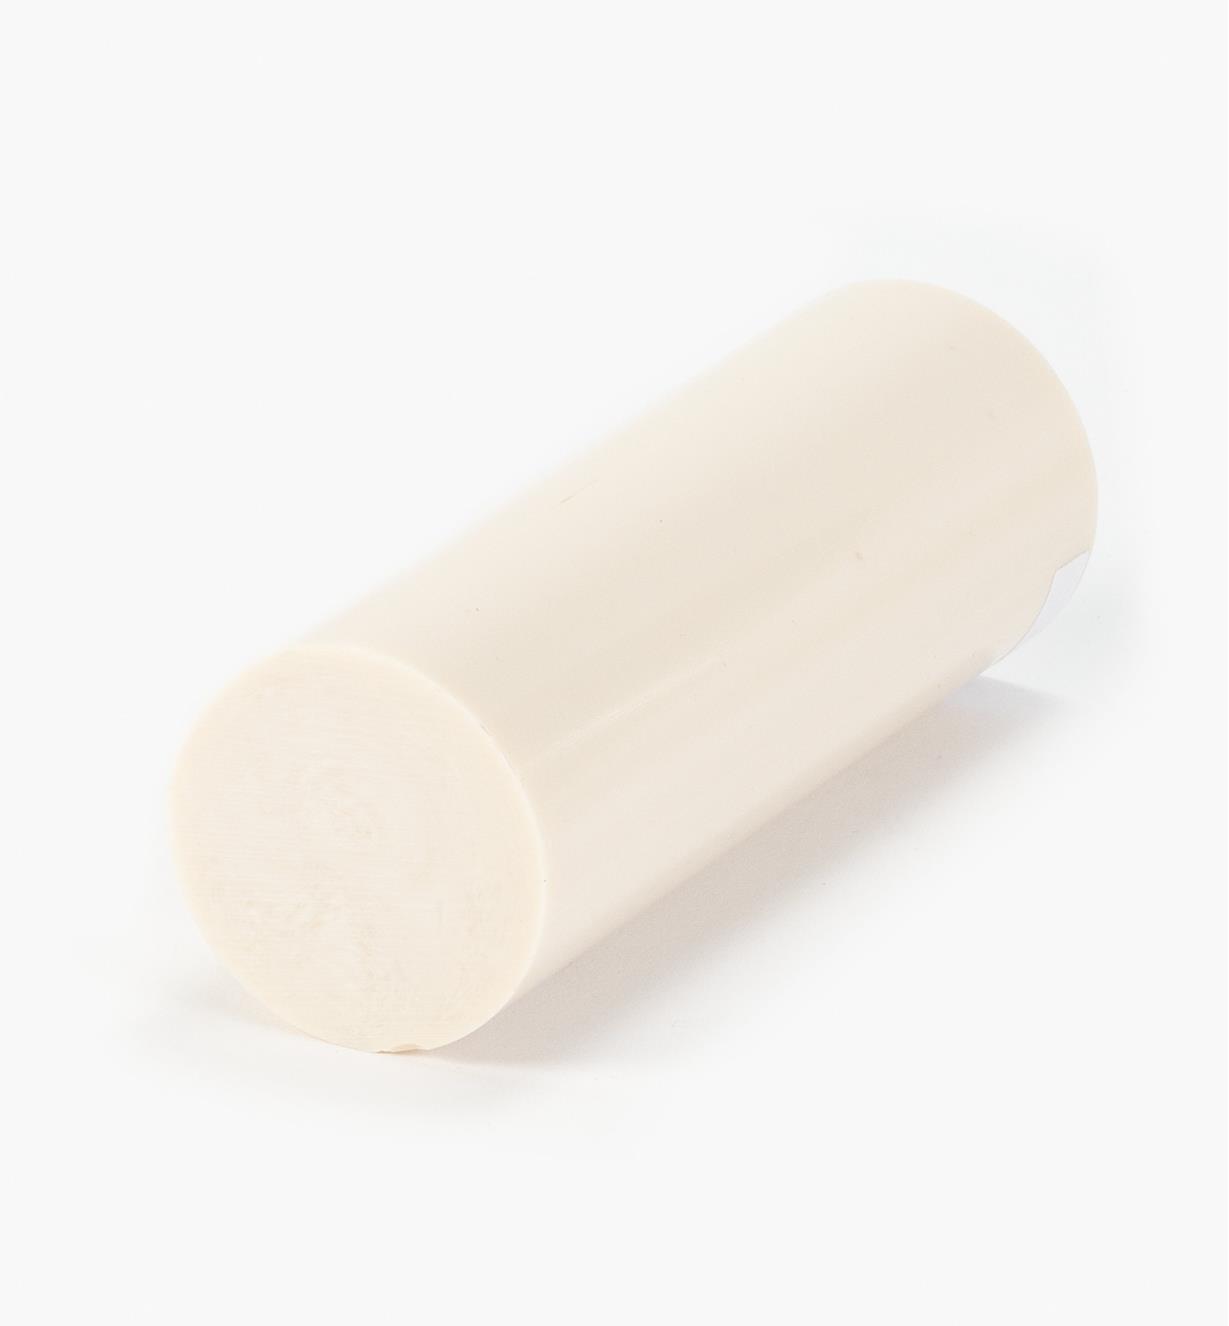 87K2050 - Simulated Ivory Rod, 50mm x 150mm